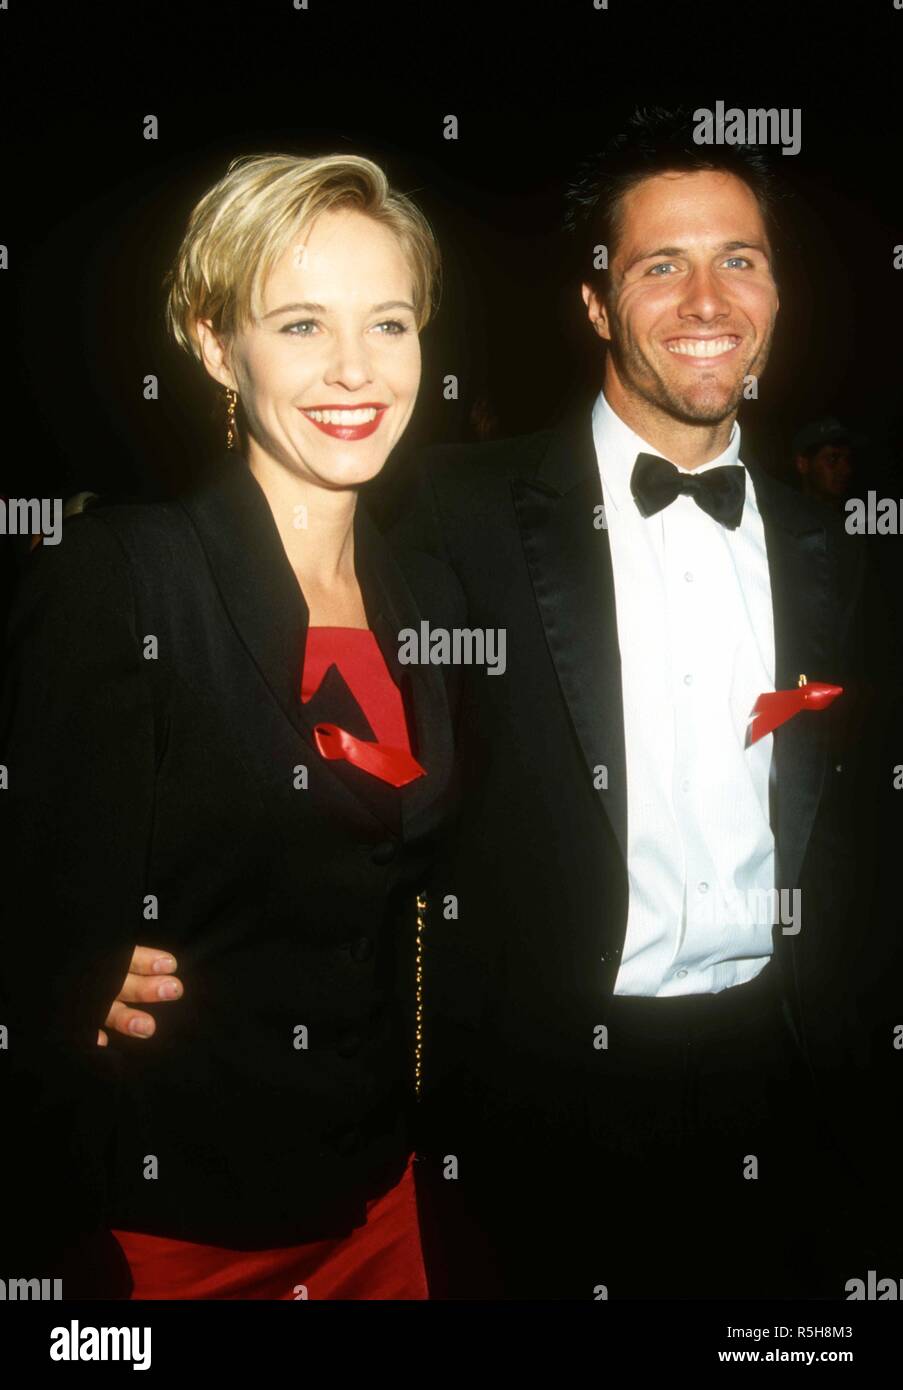 UNIVERSAL CITY, CA - MARCH 9: Actress Josie Bissett and actor Rob Estes  attend the 19th Annual People's Choice Awards on March 9, 1993 at Unversal  Studios in Universal City, California. Photo